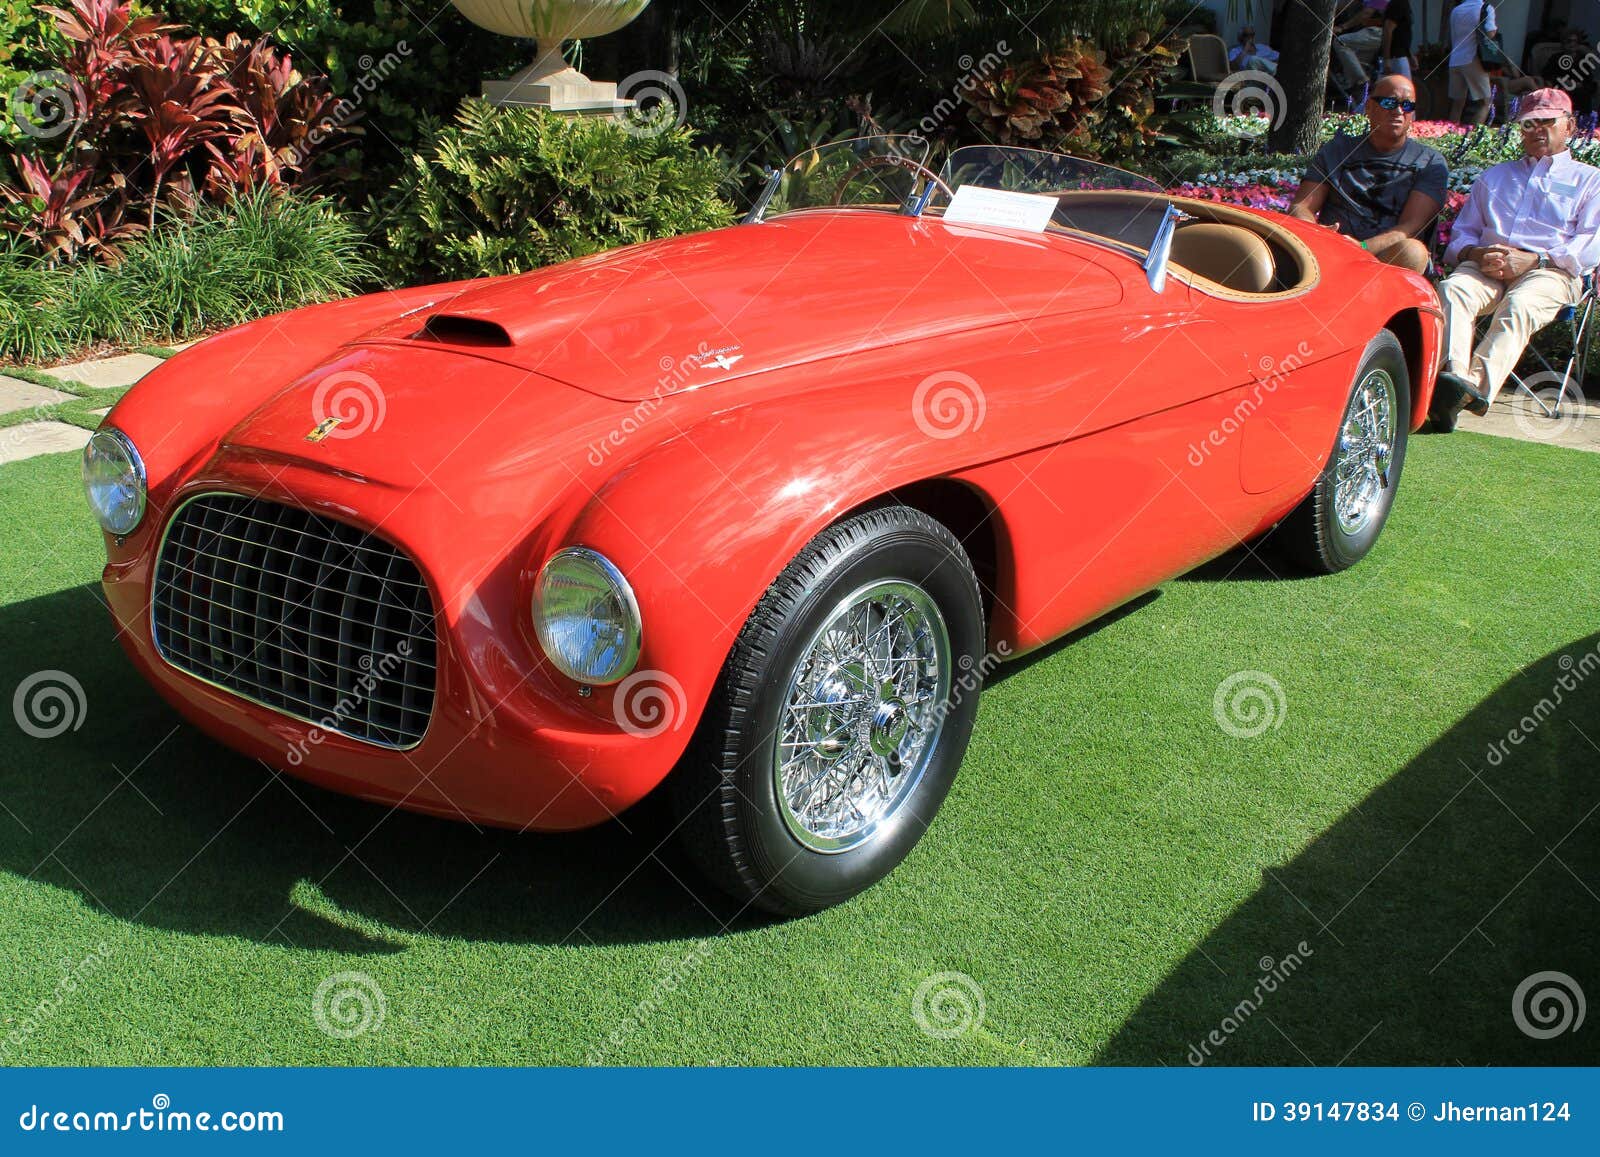 Vintage sports car showing frontend headlamps and grille. 1949 ferrari 